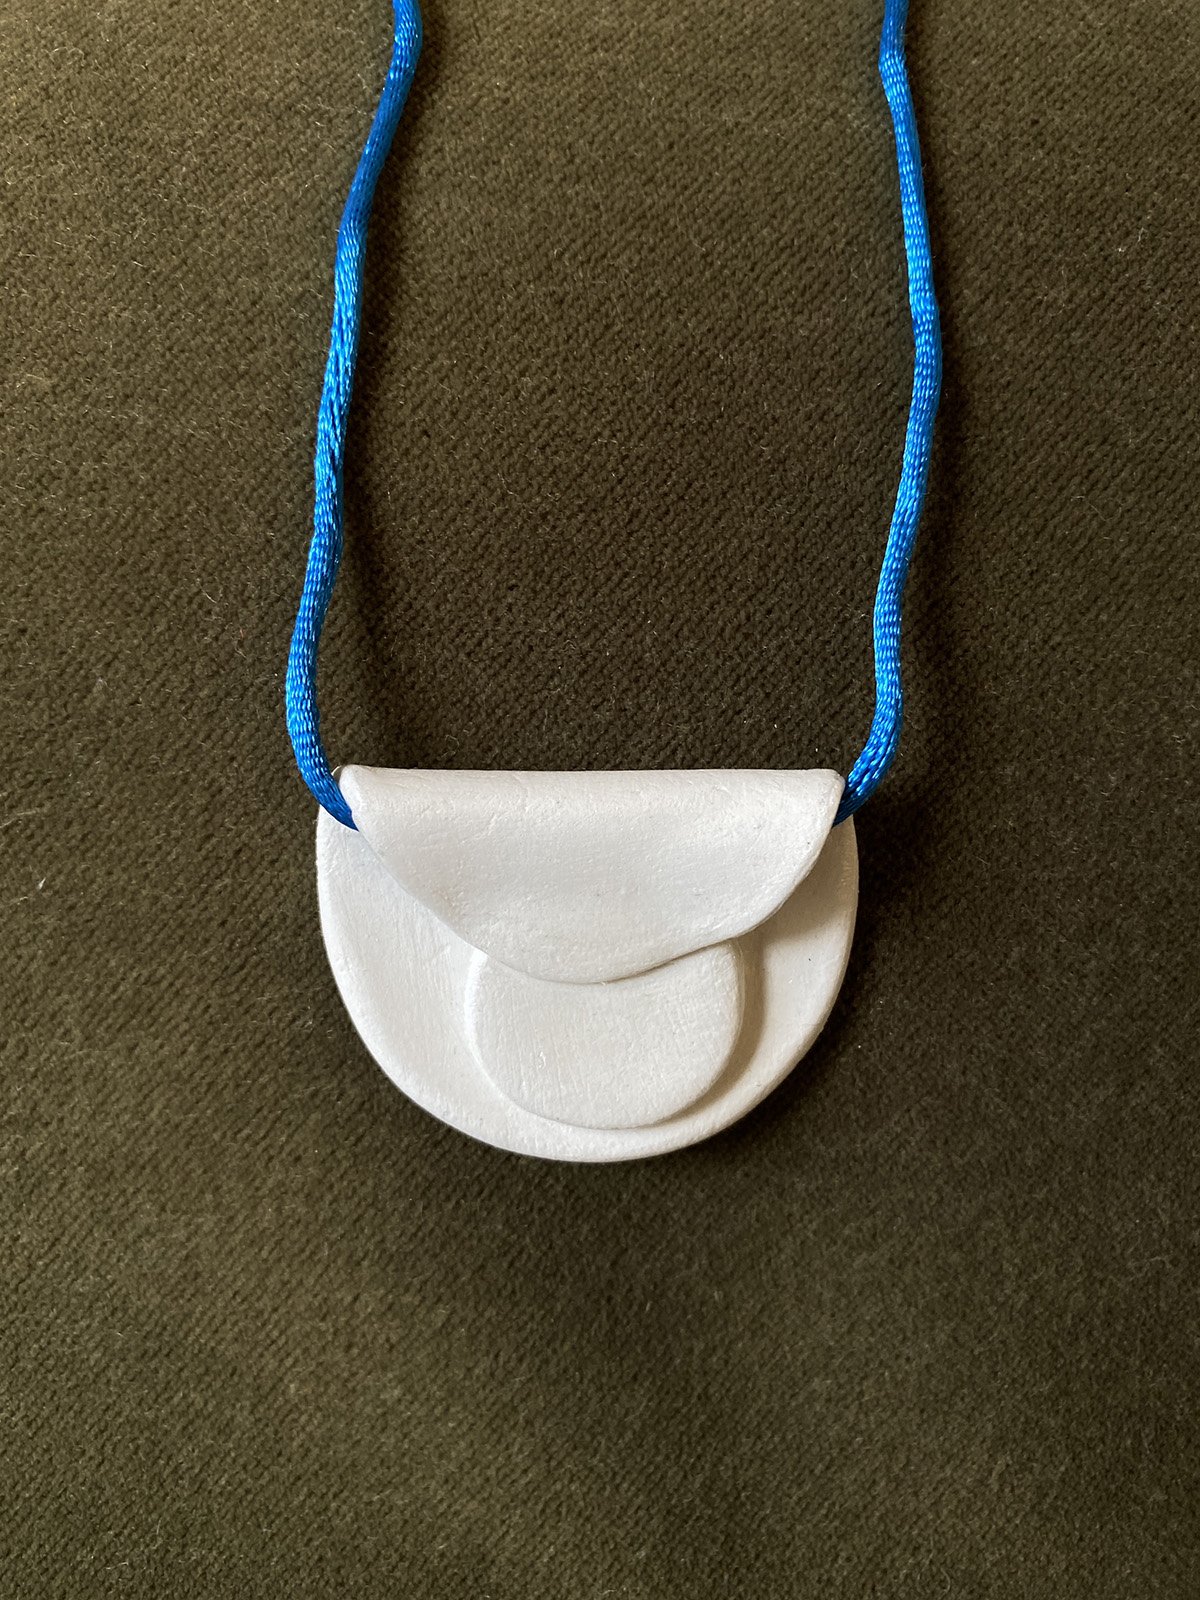 air dry clay necklace.madeon23rd.blog00026.1200.jpg